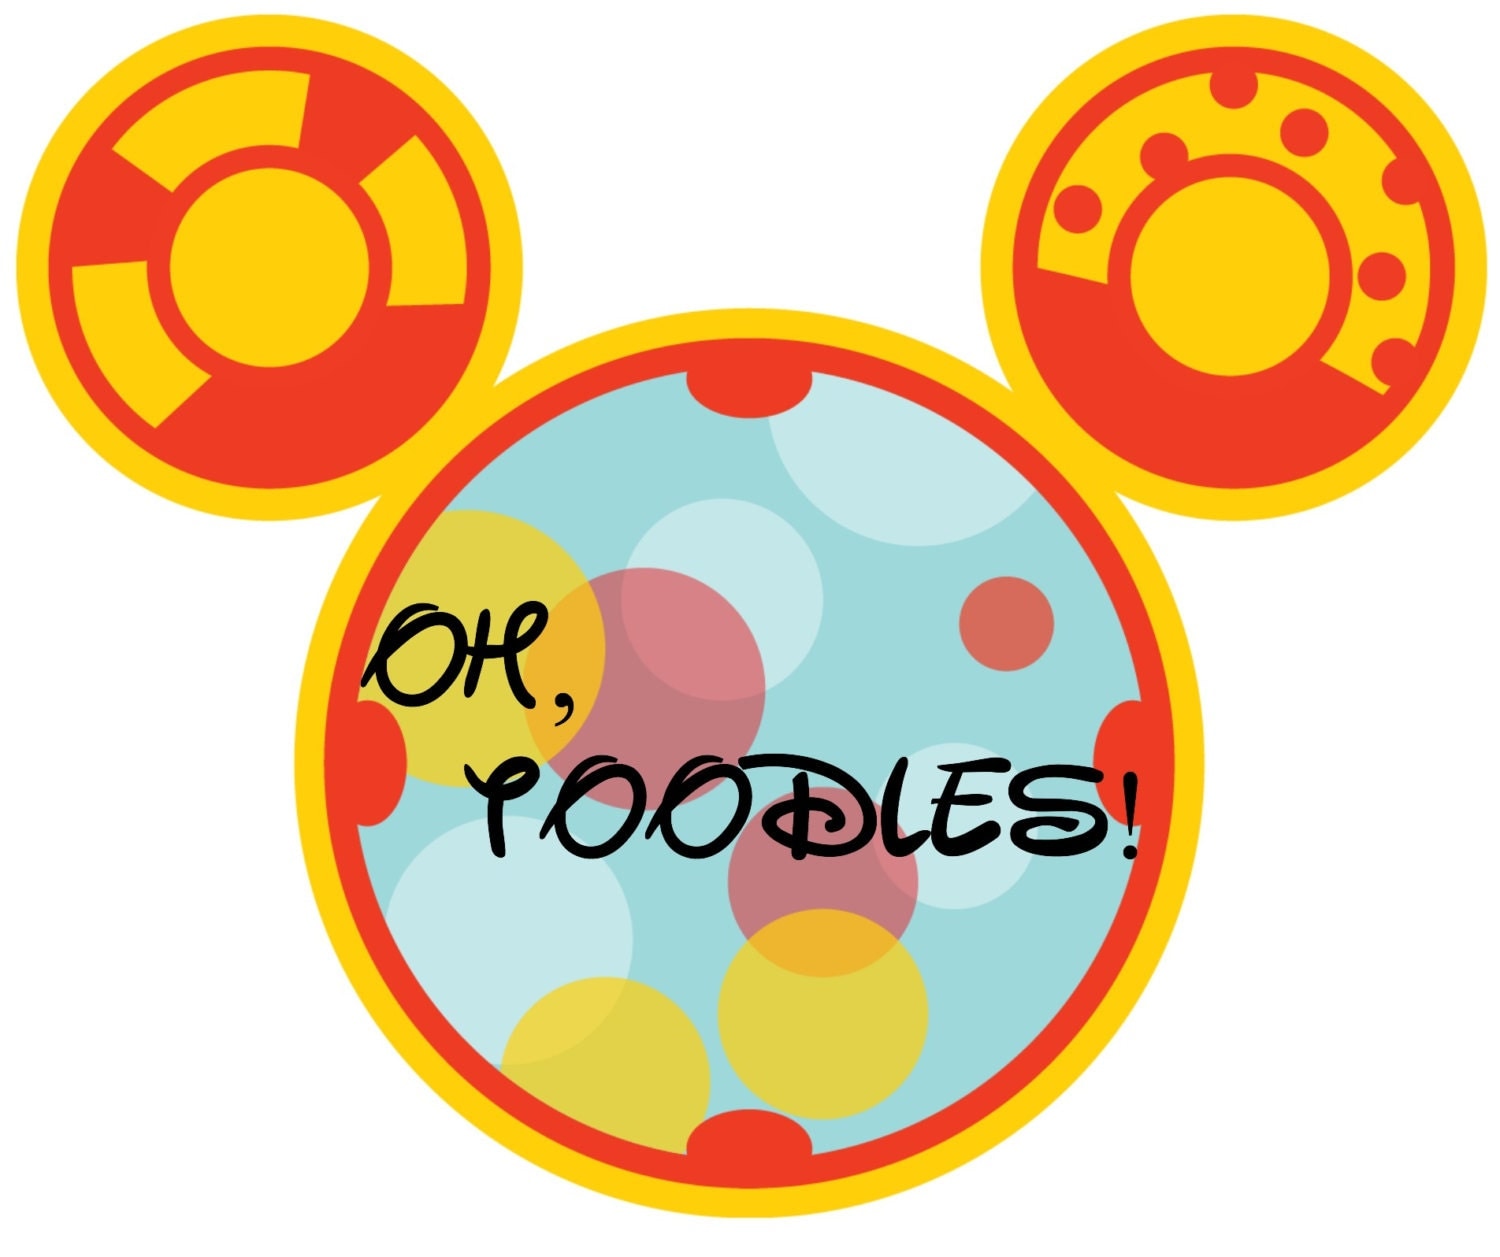 Printable Mickey Mouse Clubhouse Toodles prntbl